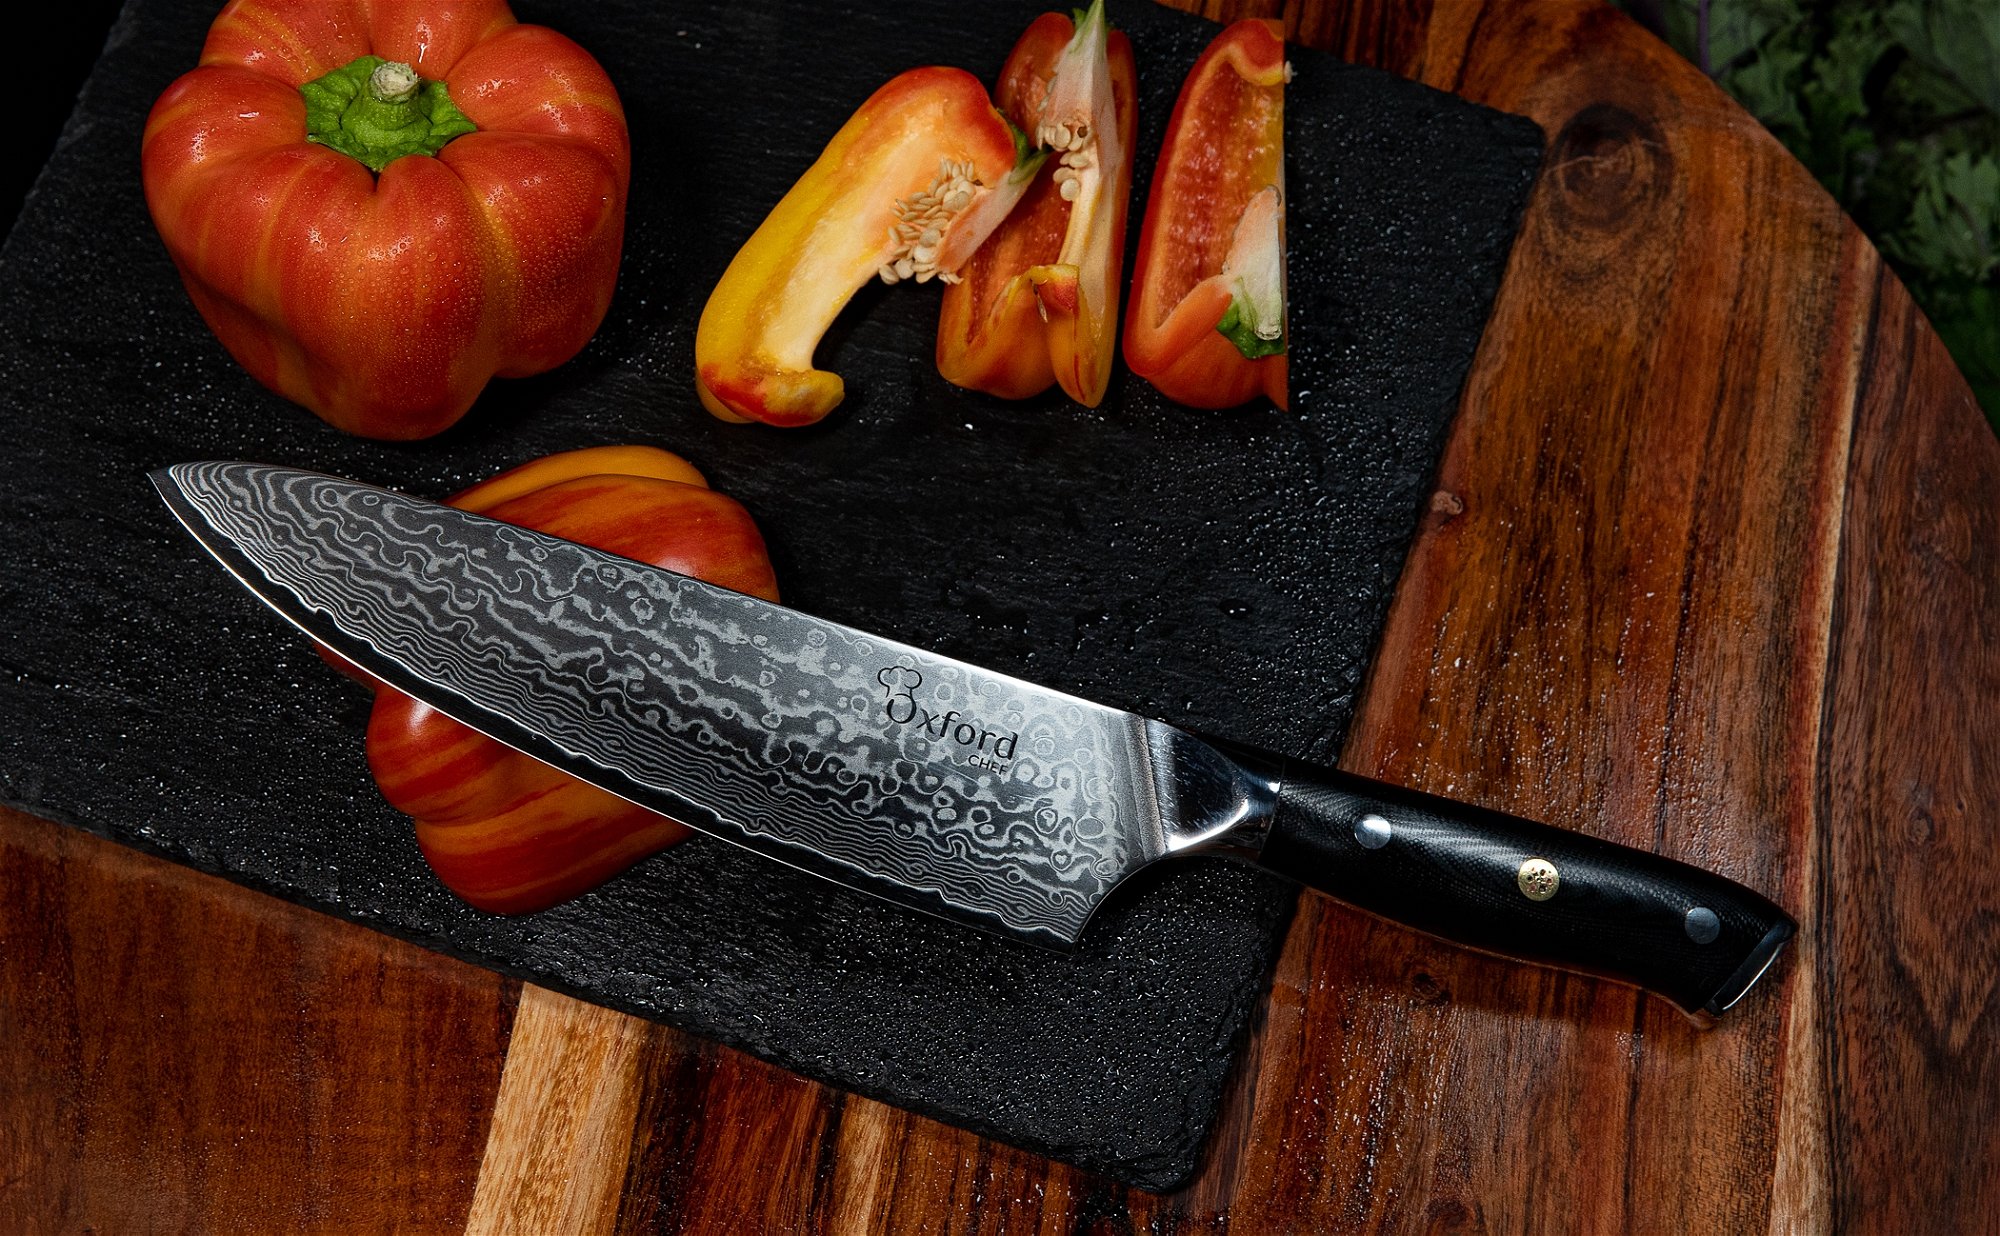 Turwho Professional Serrated Bread Knife 8 inch - Classic Damascus Pattern Japanese VG-10 Steel